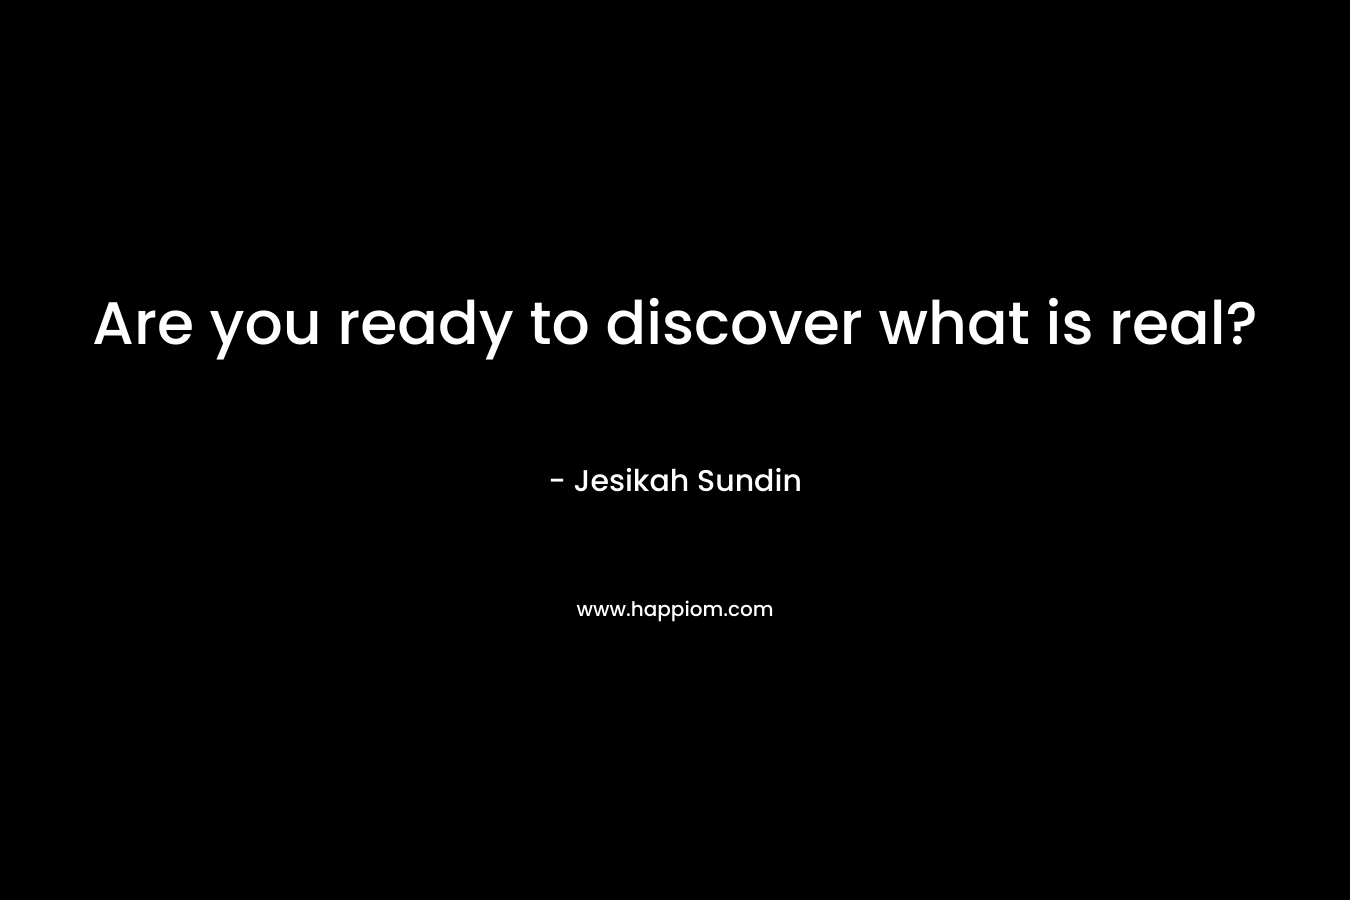 Are you ready to discover what is real? – Jesikah Sundin